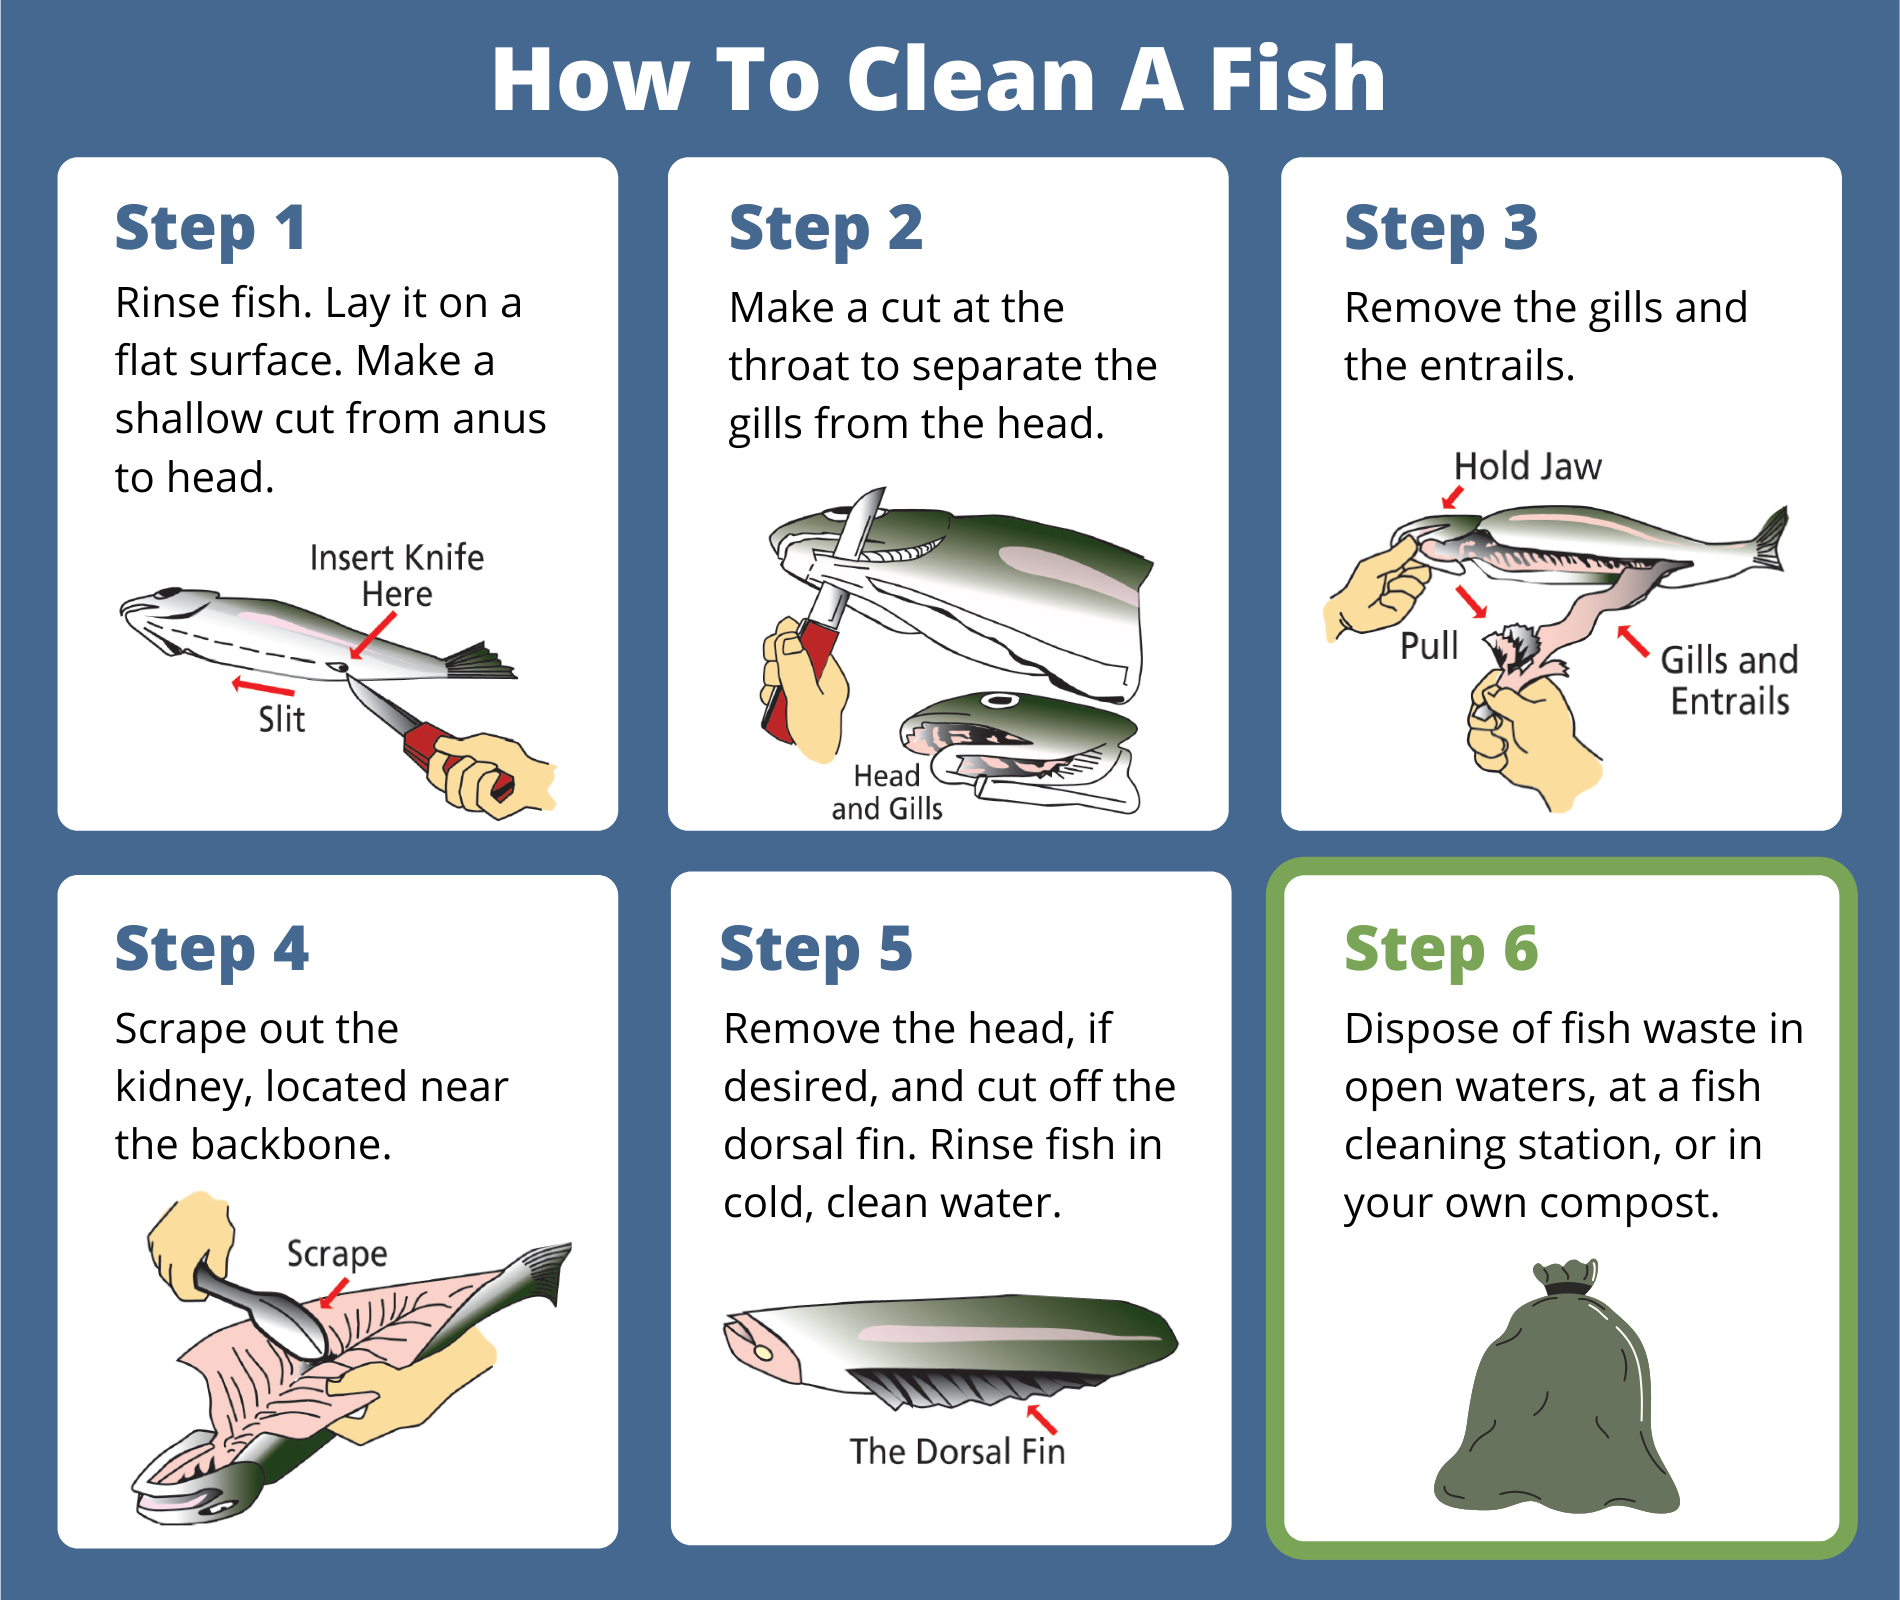 How Can You Prevent ANS? PROPERLY DISPOSE OF UNUSED BAIT